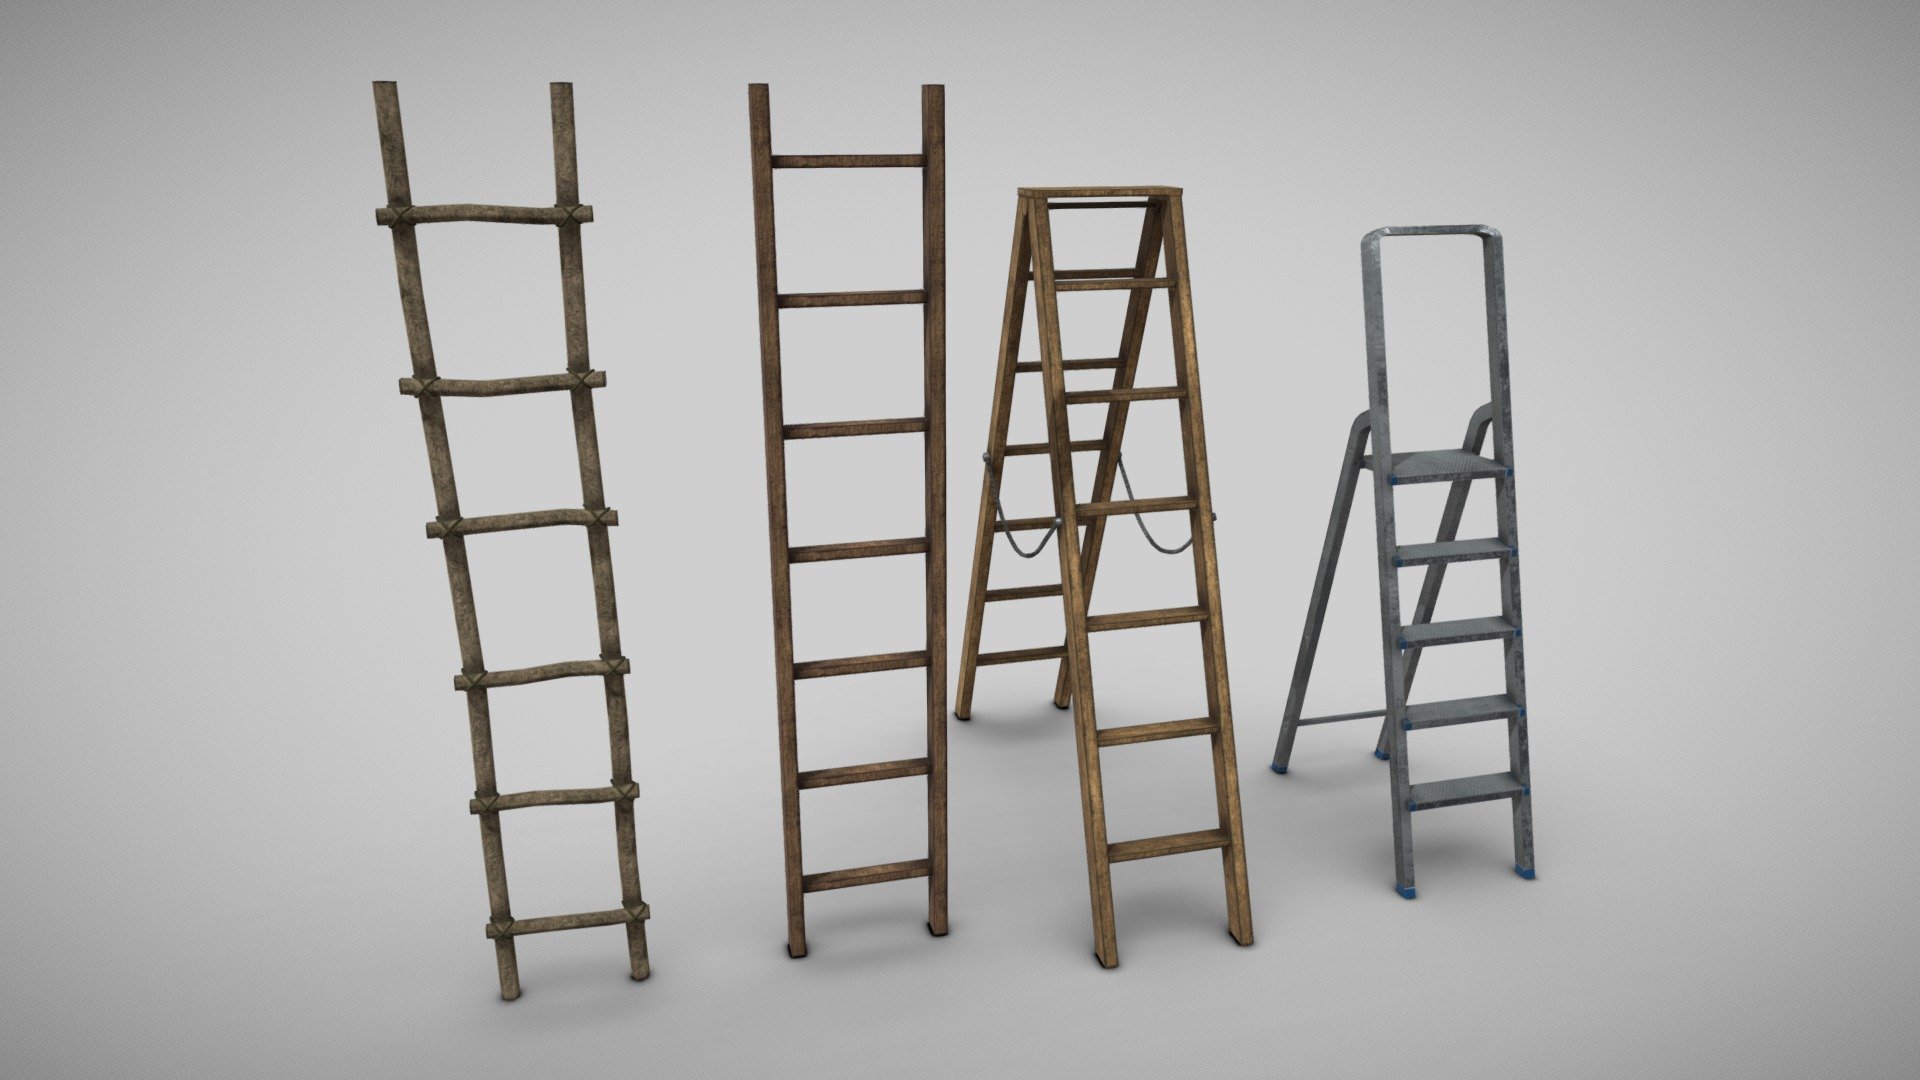 Features:


Low poly.
Game ready.
Optimized.
Grouped and nomed parts.
Easy to modify.
Textures included and materials applied.
All formats tested and working.
Textures PBR 2048x2048.
 - Ladder Collection - Buy Royalty Free 3D model by Elvair Lima (@elvair) 3d model